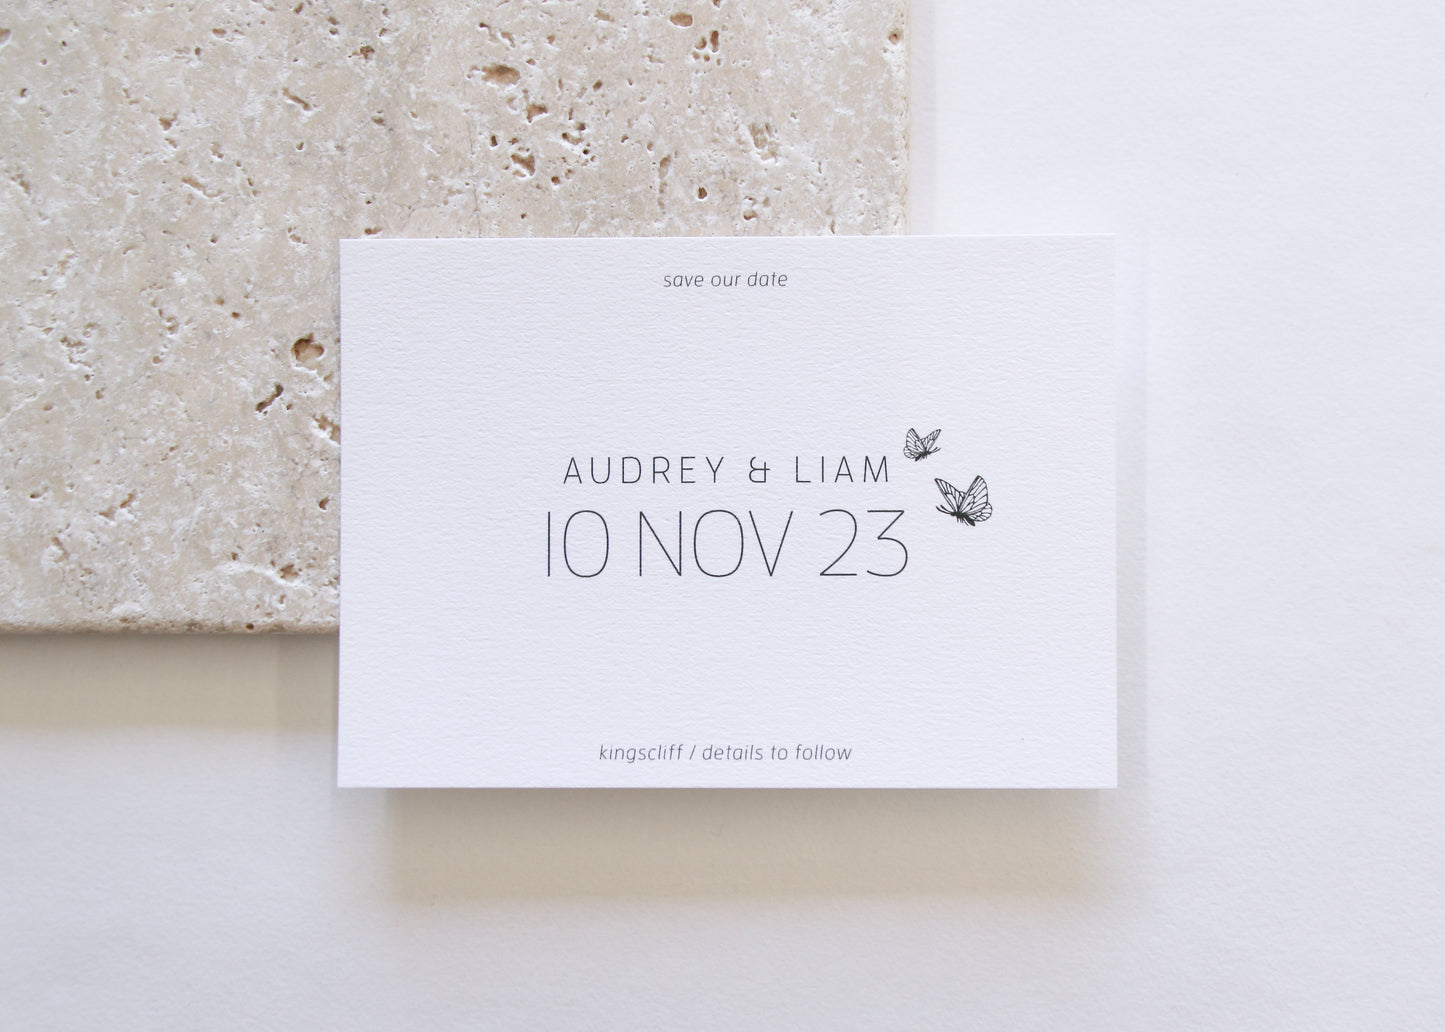 Monarch Save Our Date Card